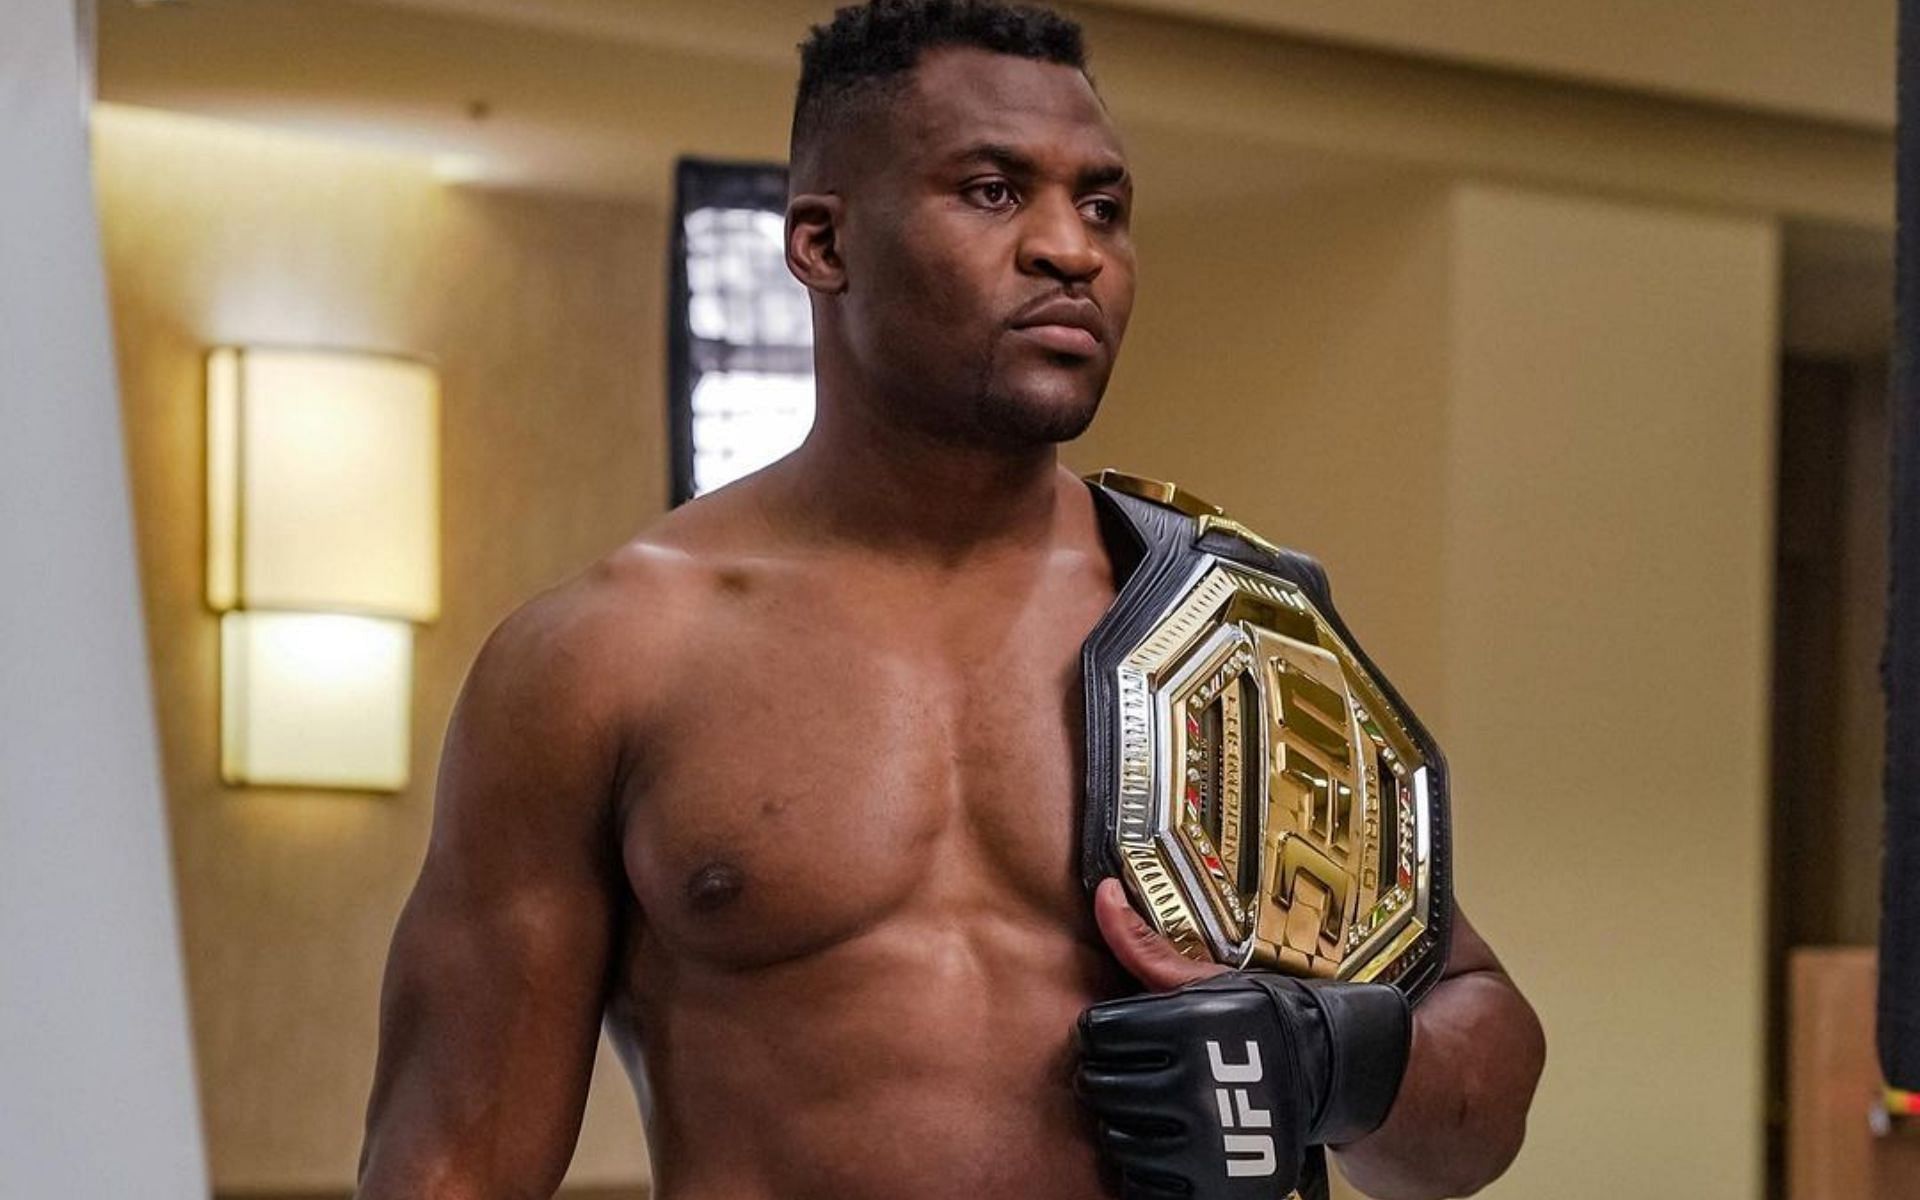 Francis Ngannou welcomes new UFC signee with playful banter [Images via: @francisngannou on Instagram]